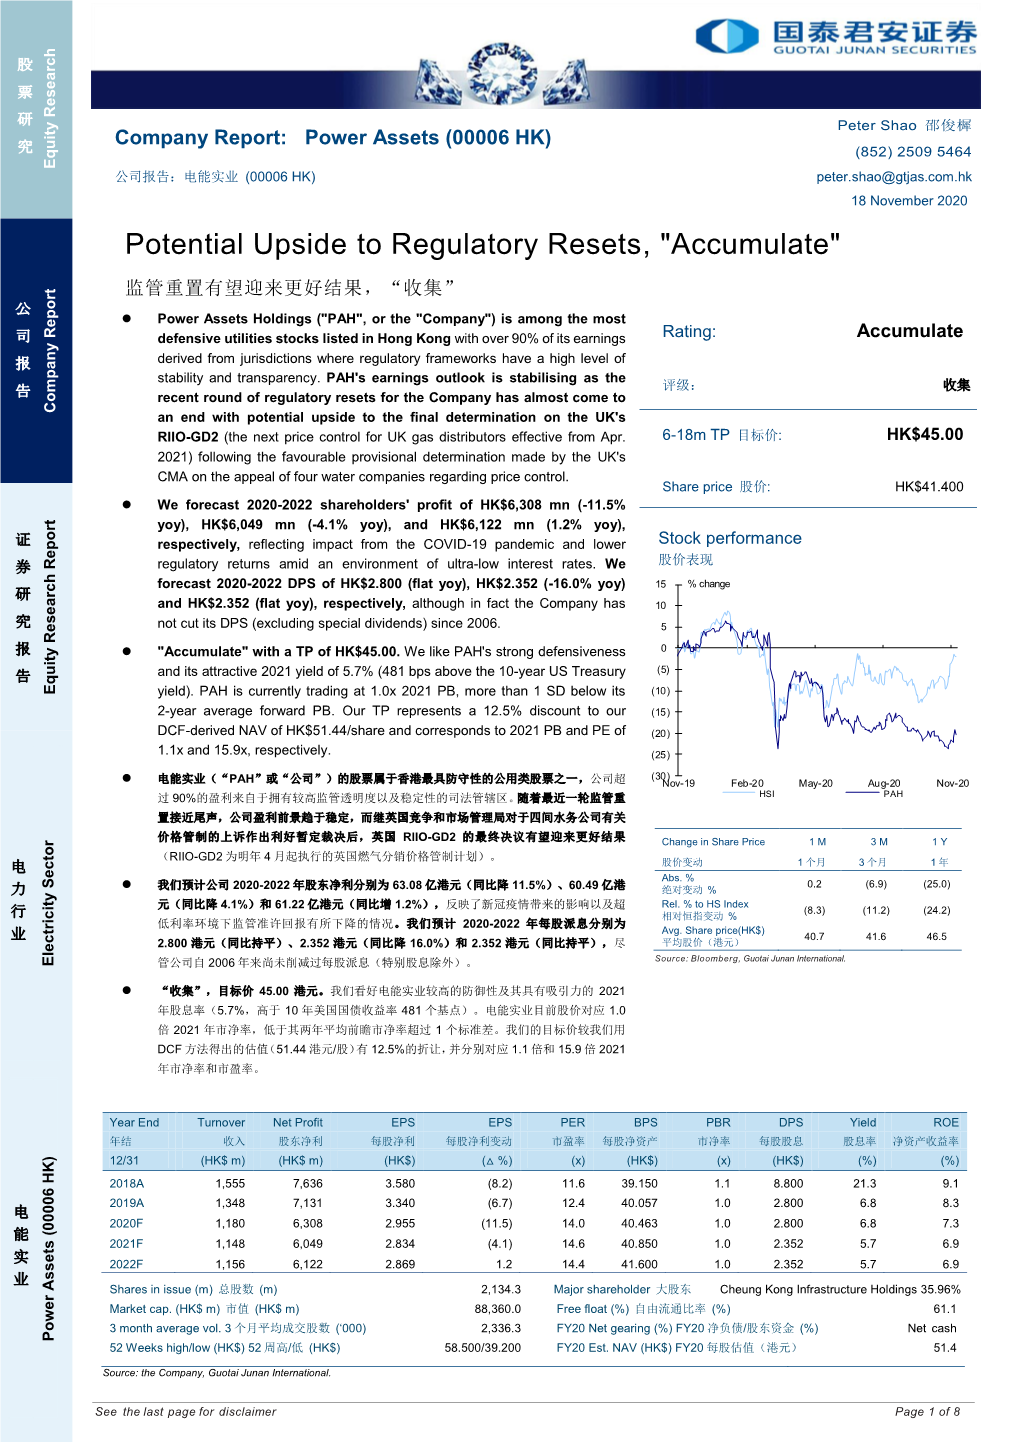 Potential Upside to Regulatory Resets, "Accumulate"